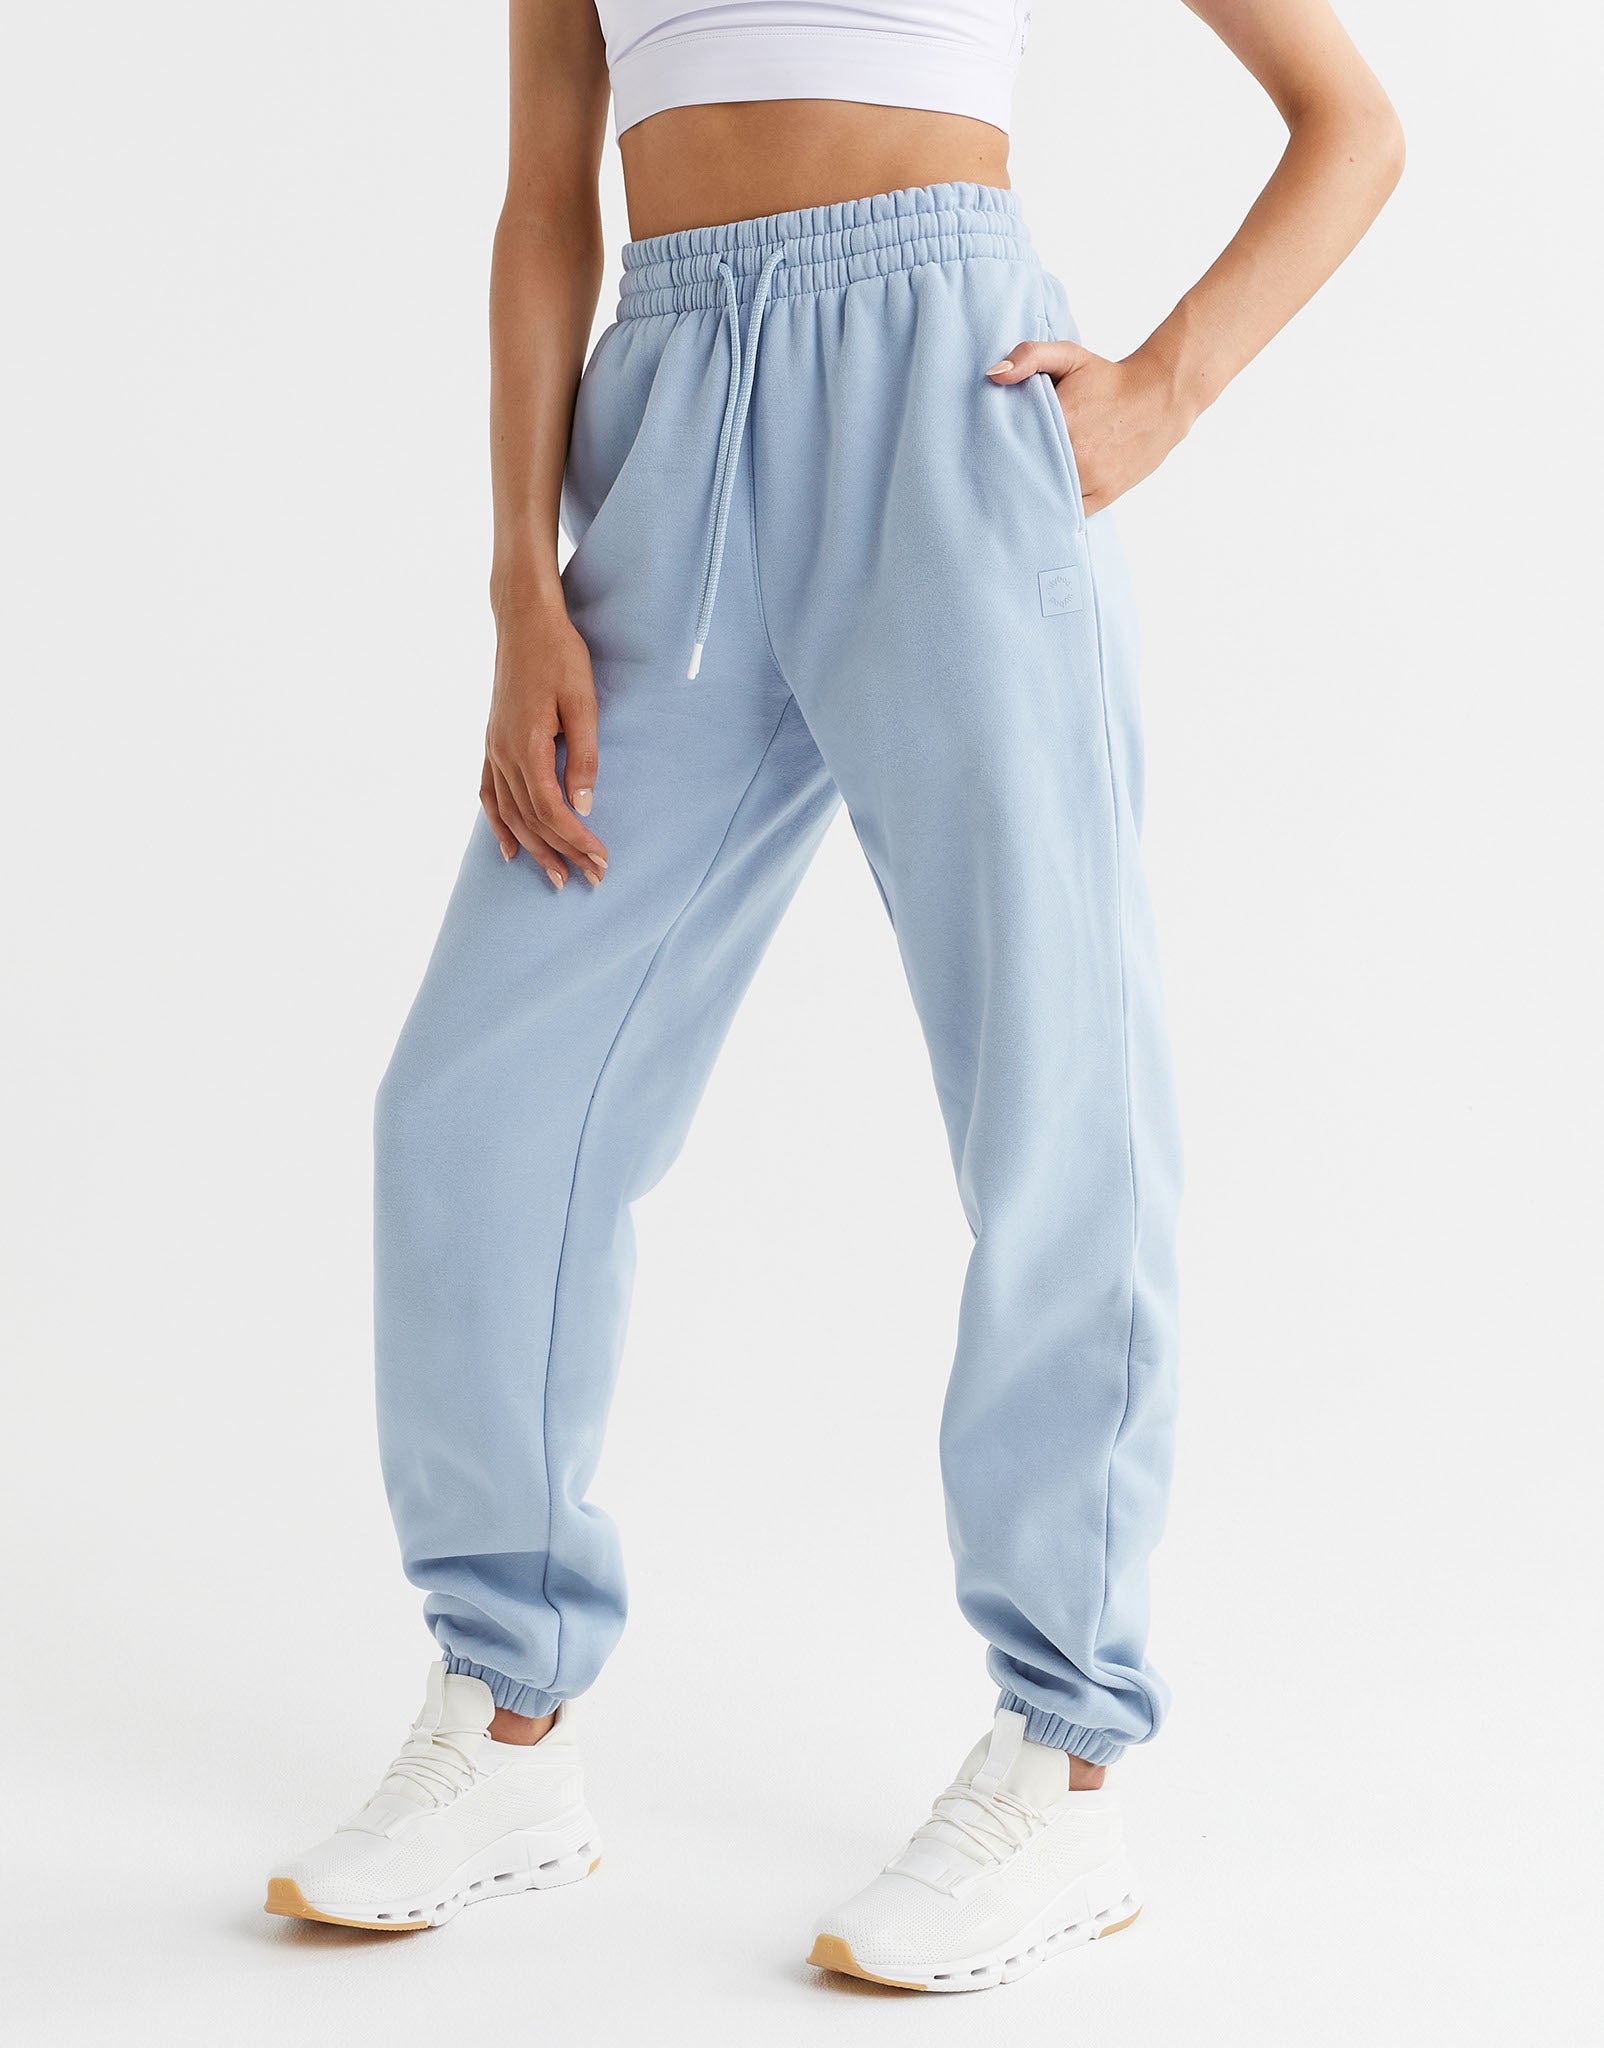 Lilybod-Lucy-Oversized-Fleece-Track-Pant-Cloud-LL89-CLD-2-New.jpeg